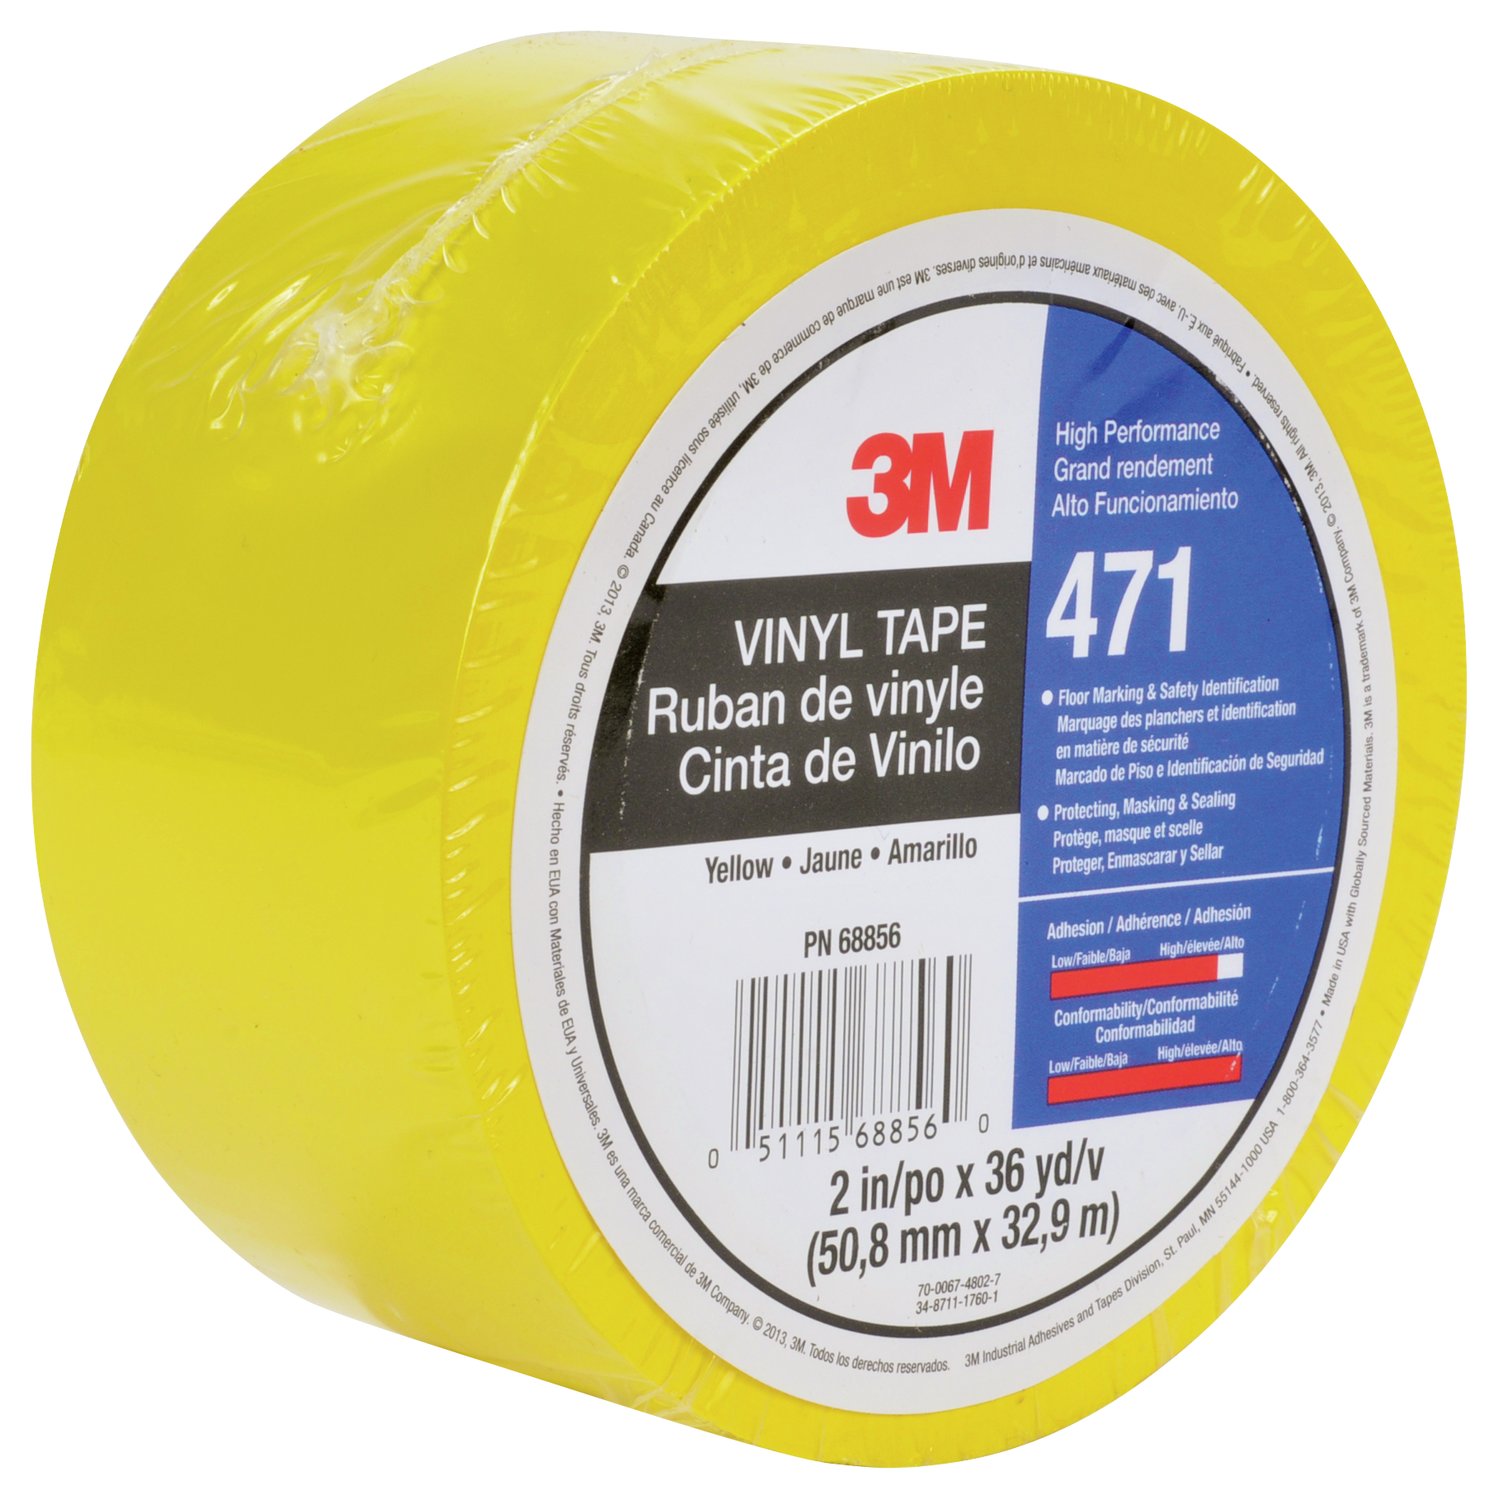 2 Rolls Double Sided Tape Heavy Duty - 240 x 1.2 & 0.8 - Removable Nano  Tape for